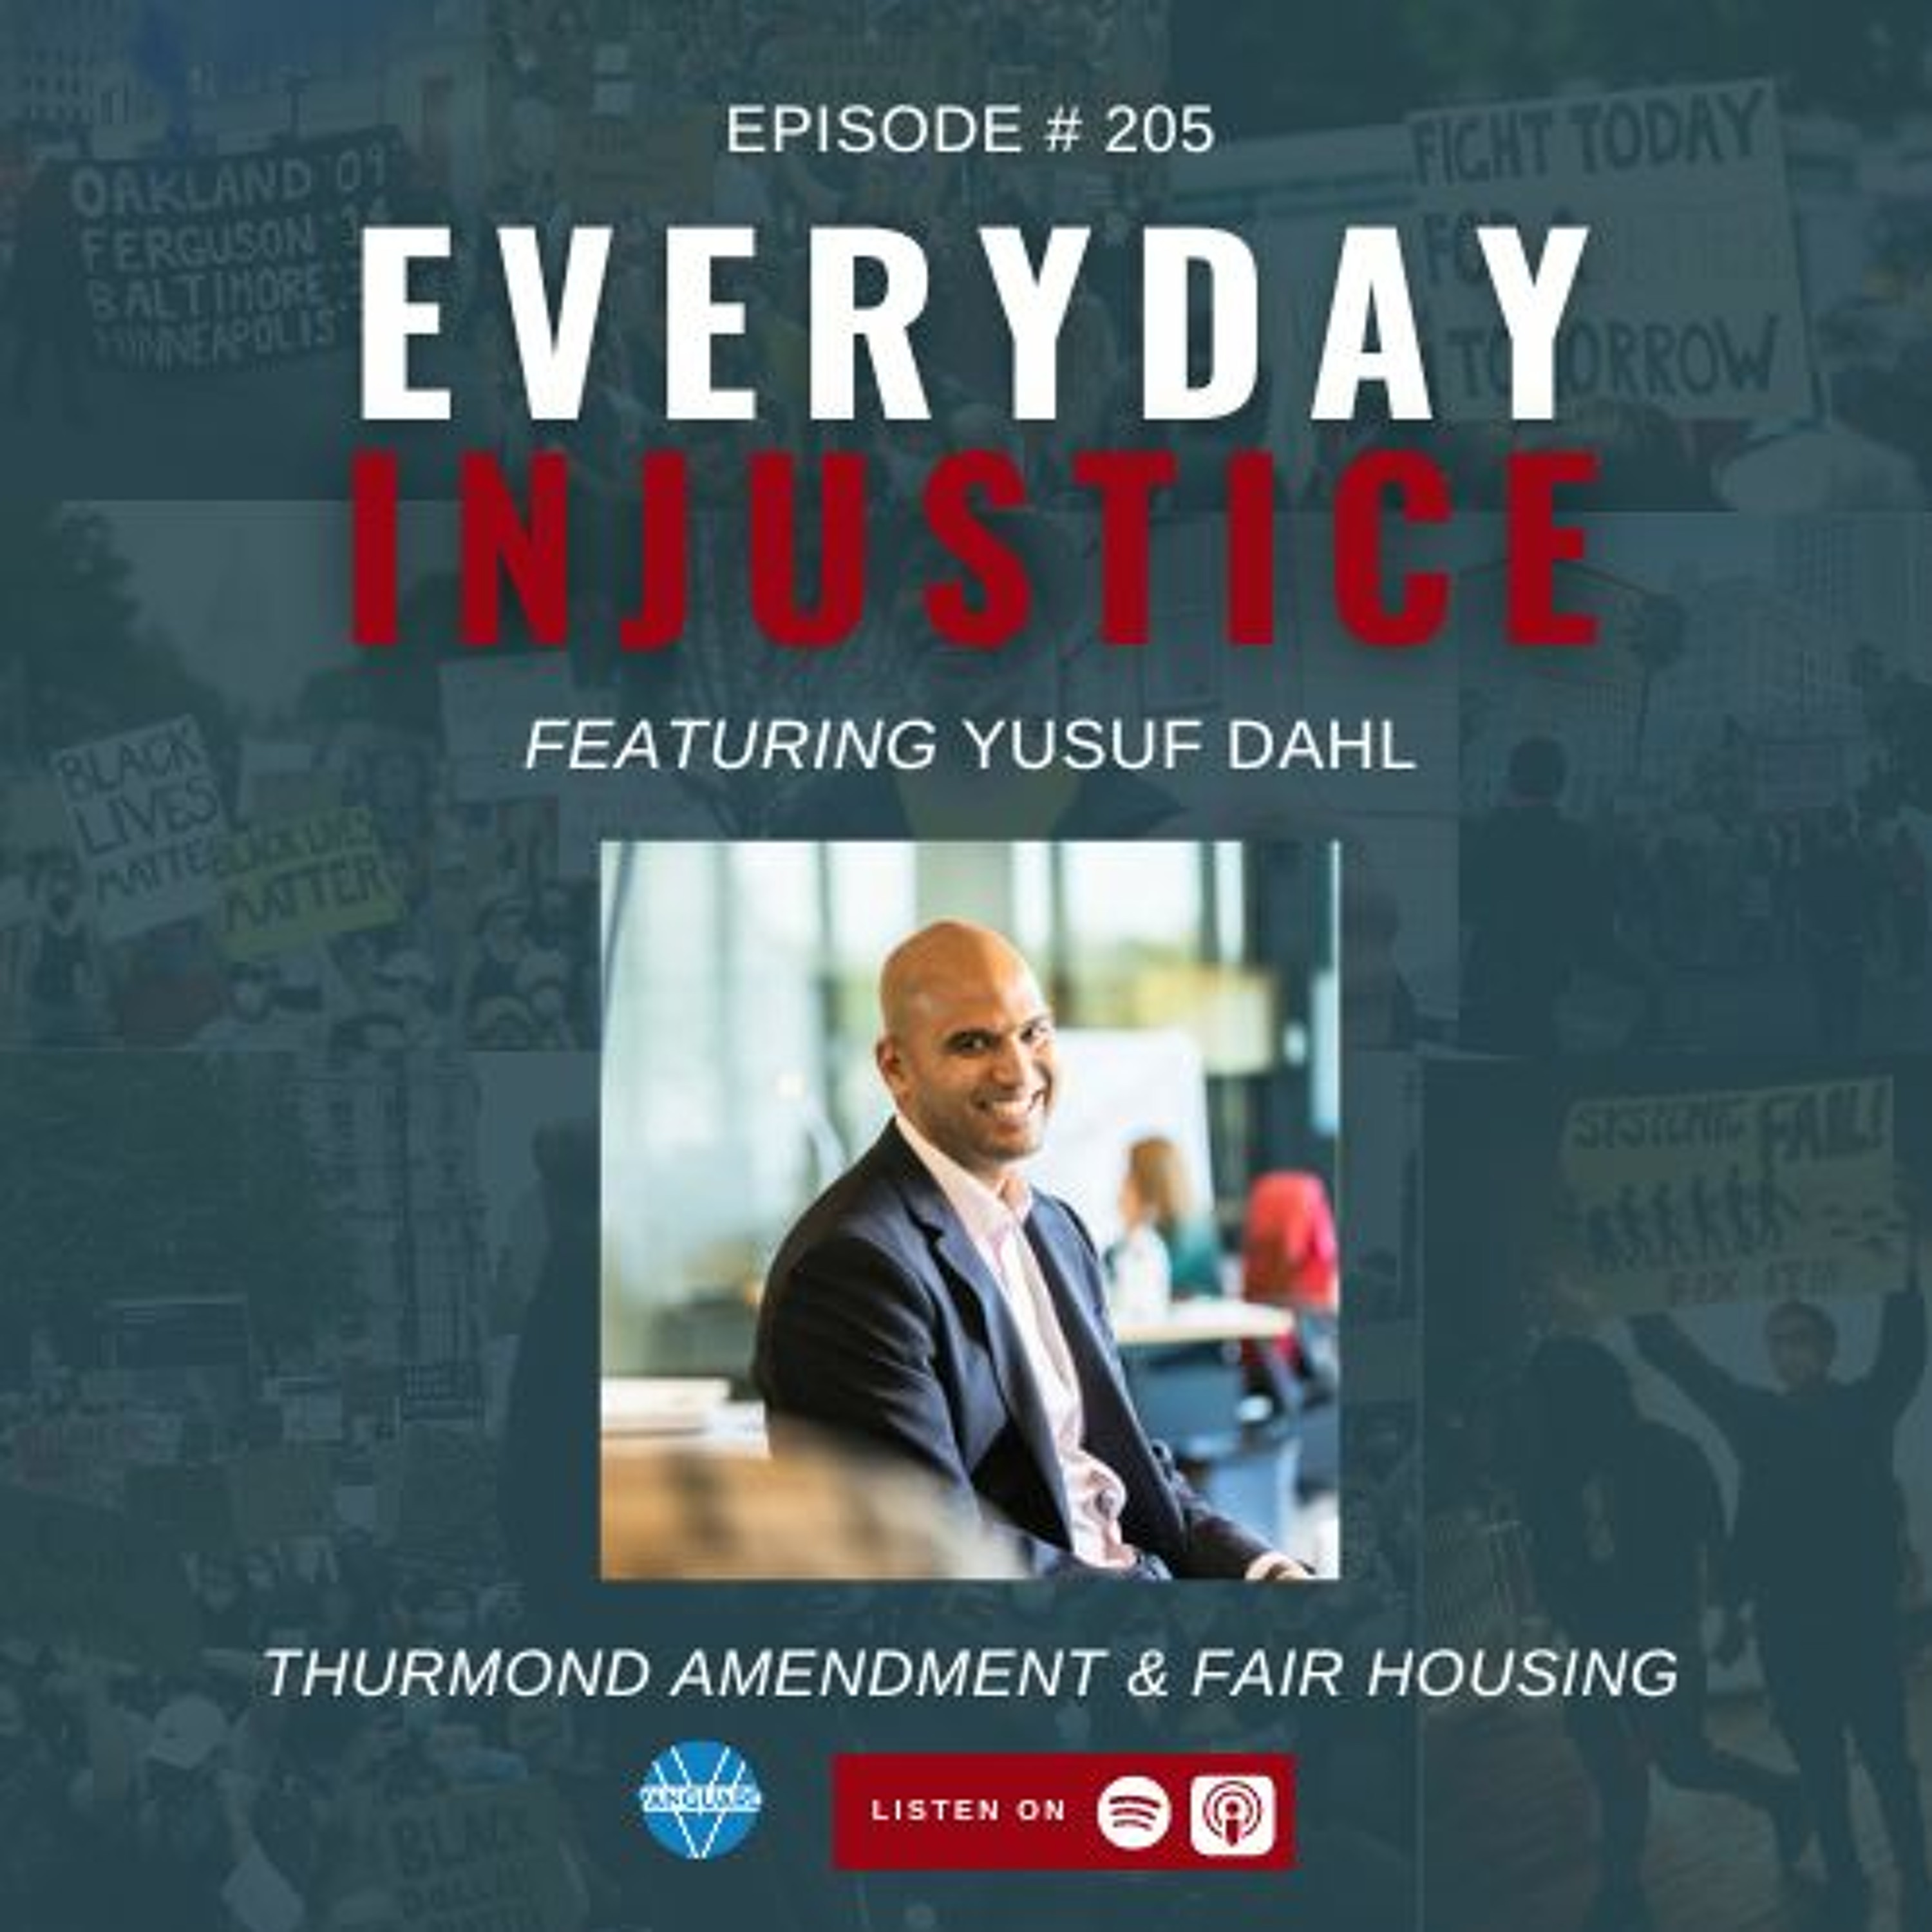 Everyday Injustice Podcast Episode 205: Thurmond Amendment Continues to Bar People From Housing